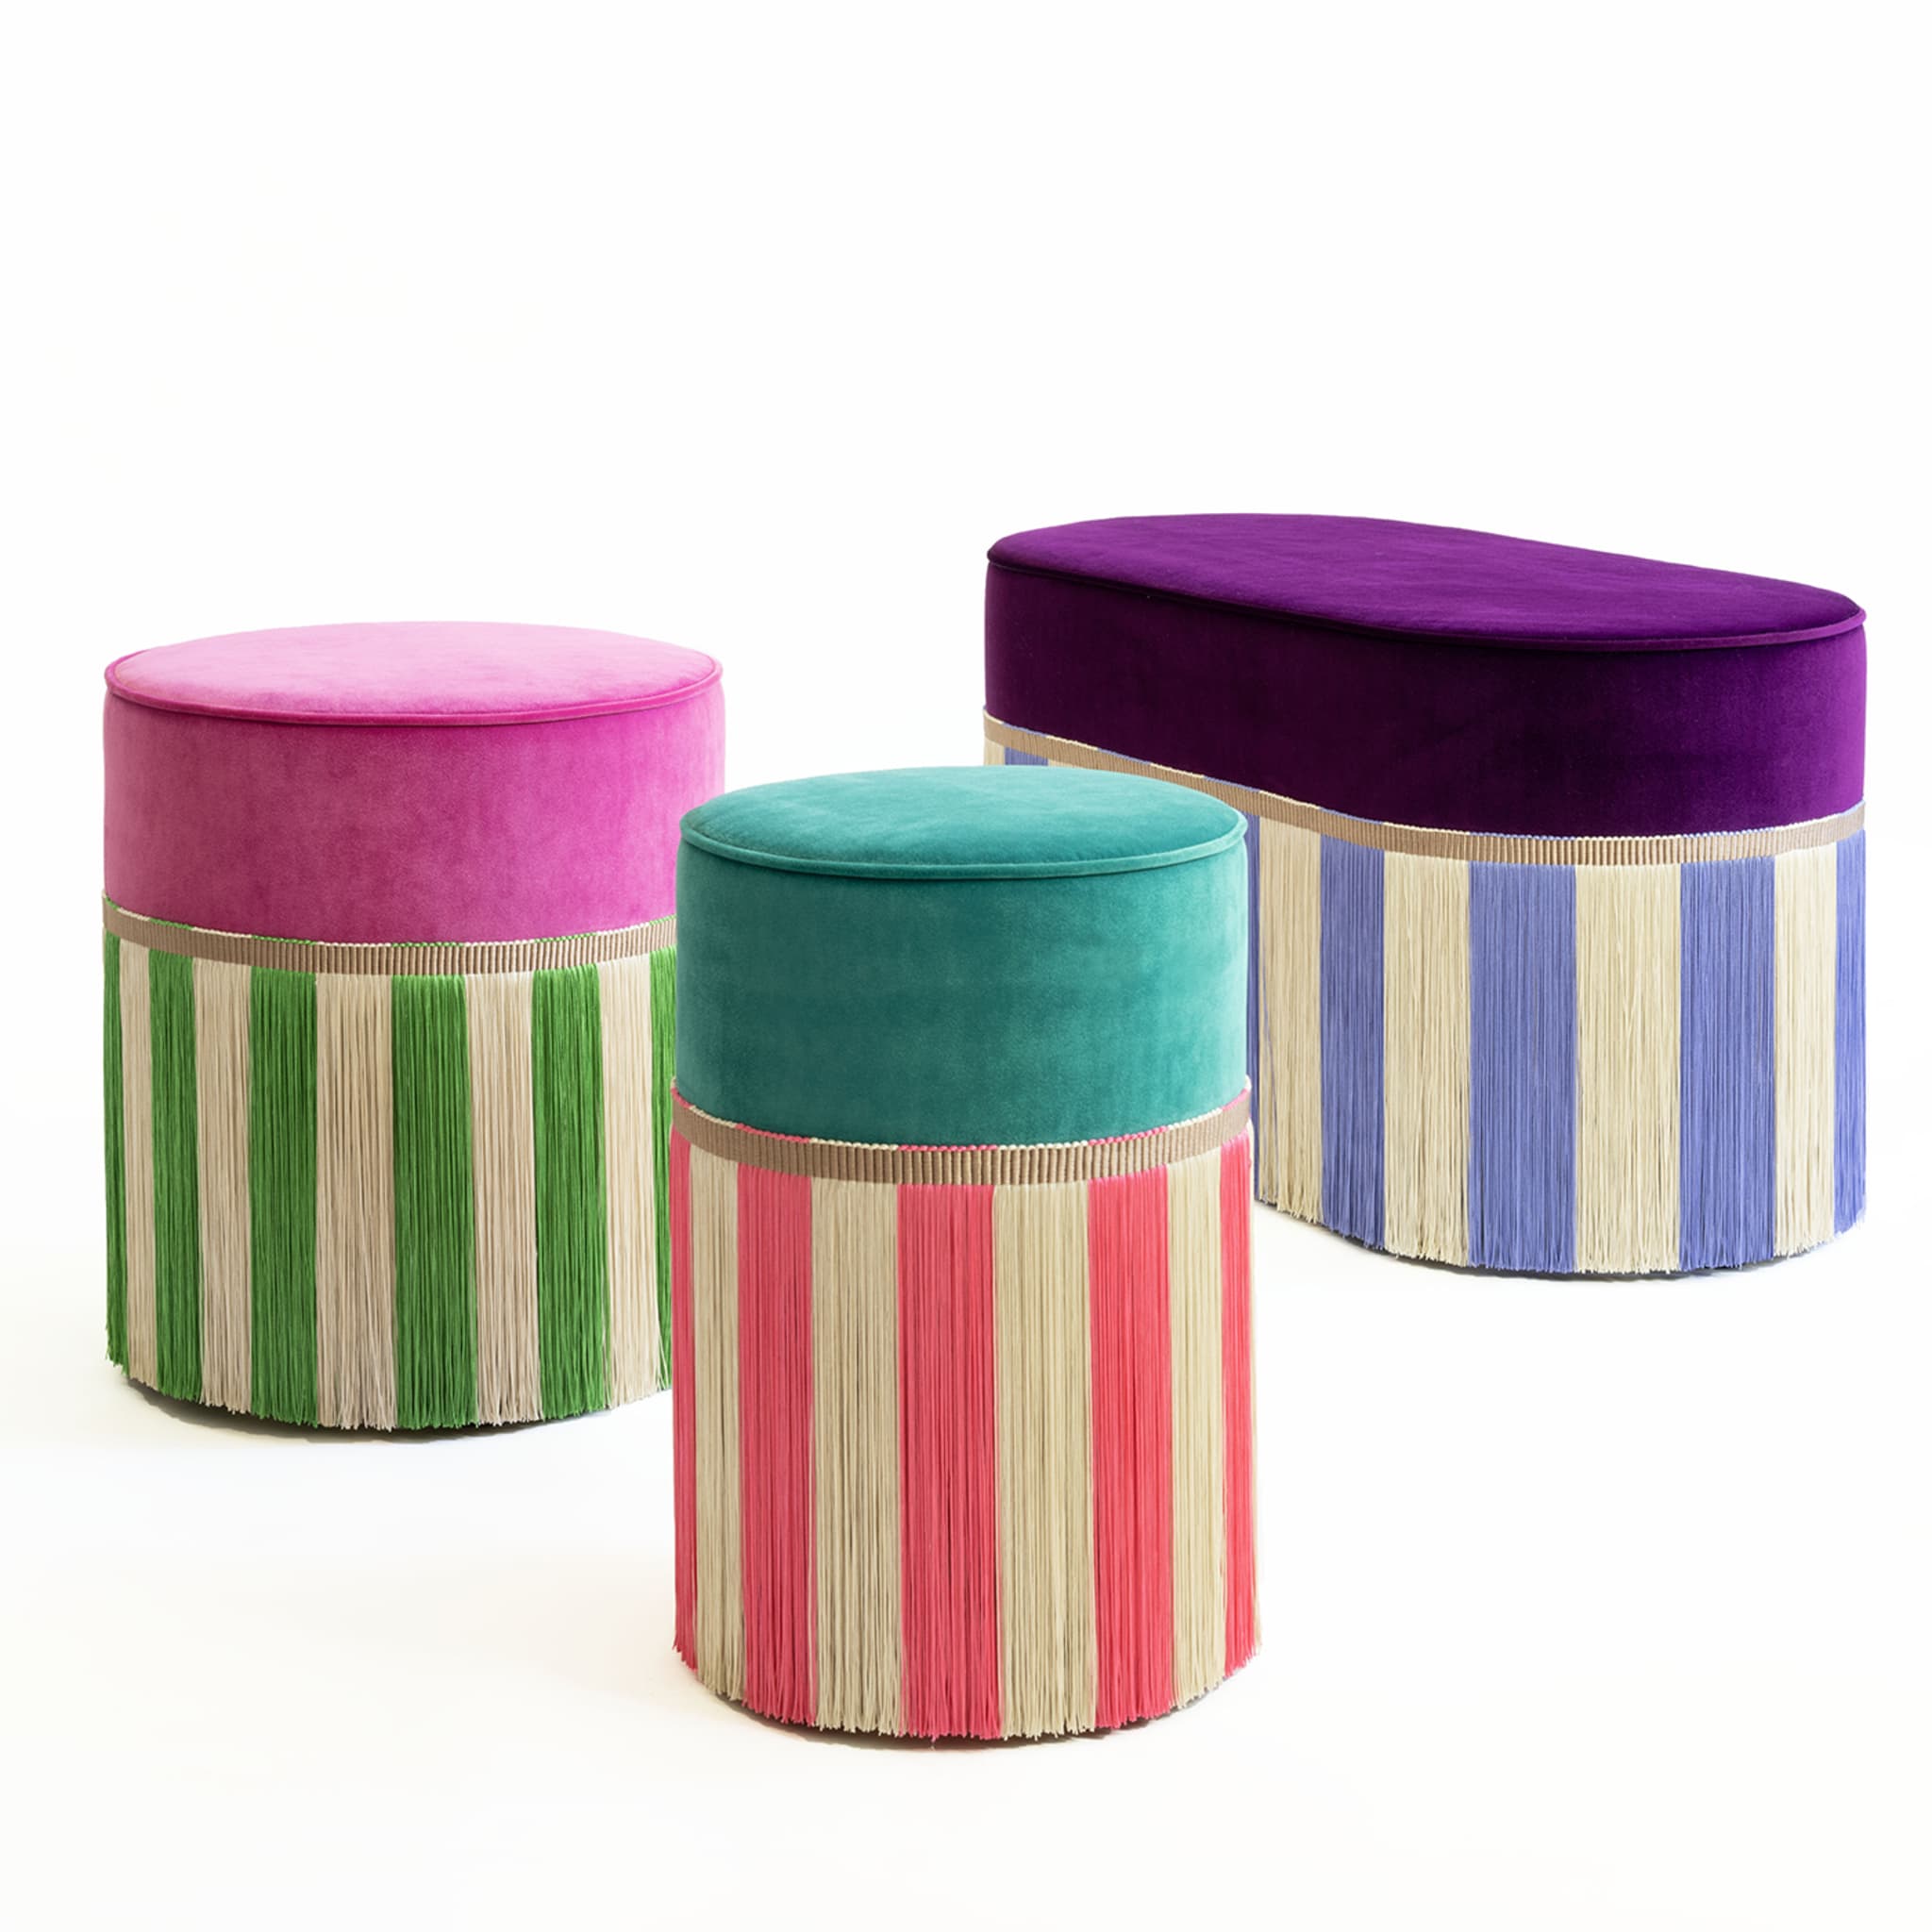 Couture Geometric Riga Small Turquoise & Pink Ottoman - Alternative view 2